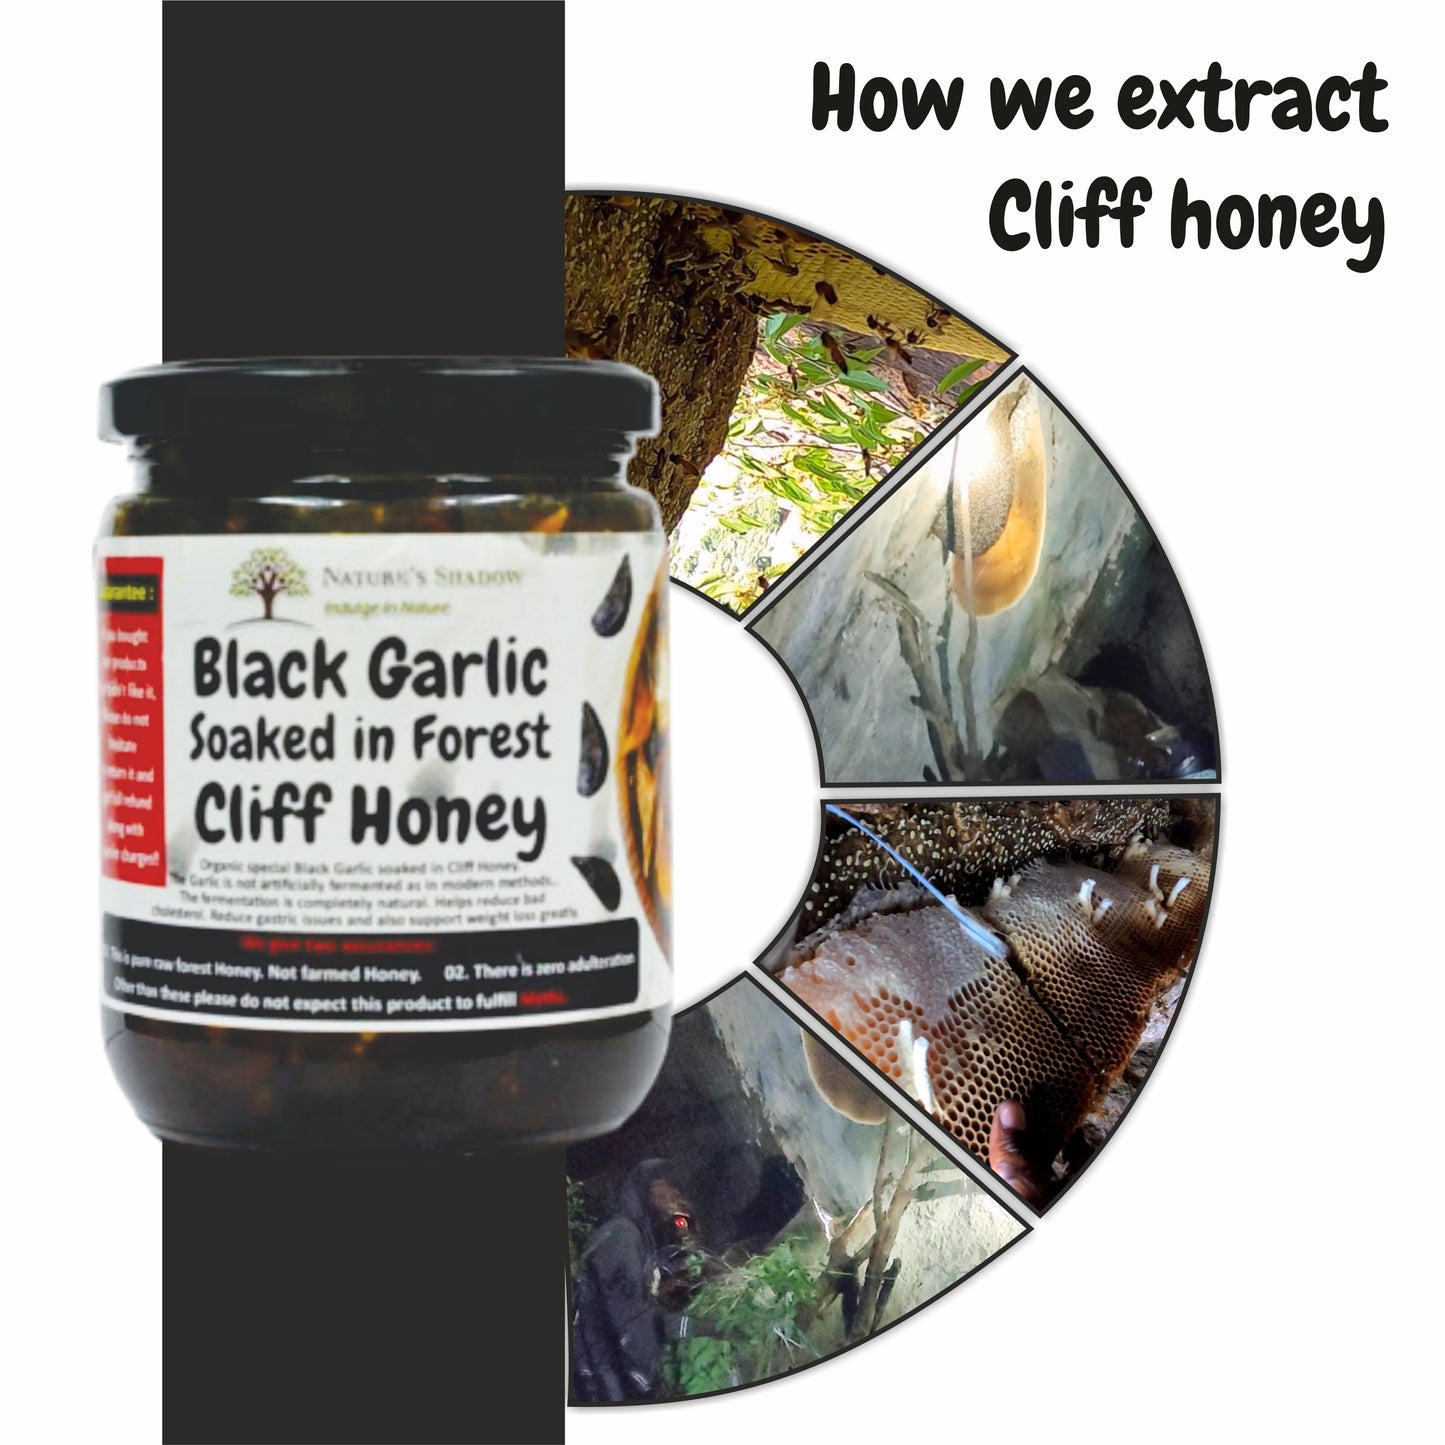 Black Garlic Soaked In Forest Cliff Honey (Naturally Fermented Black Garlics)